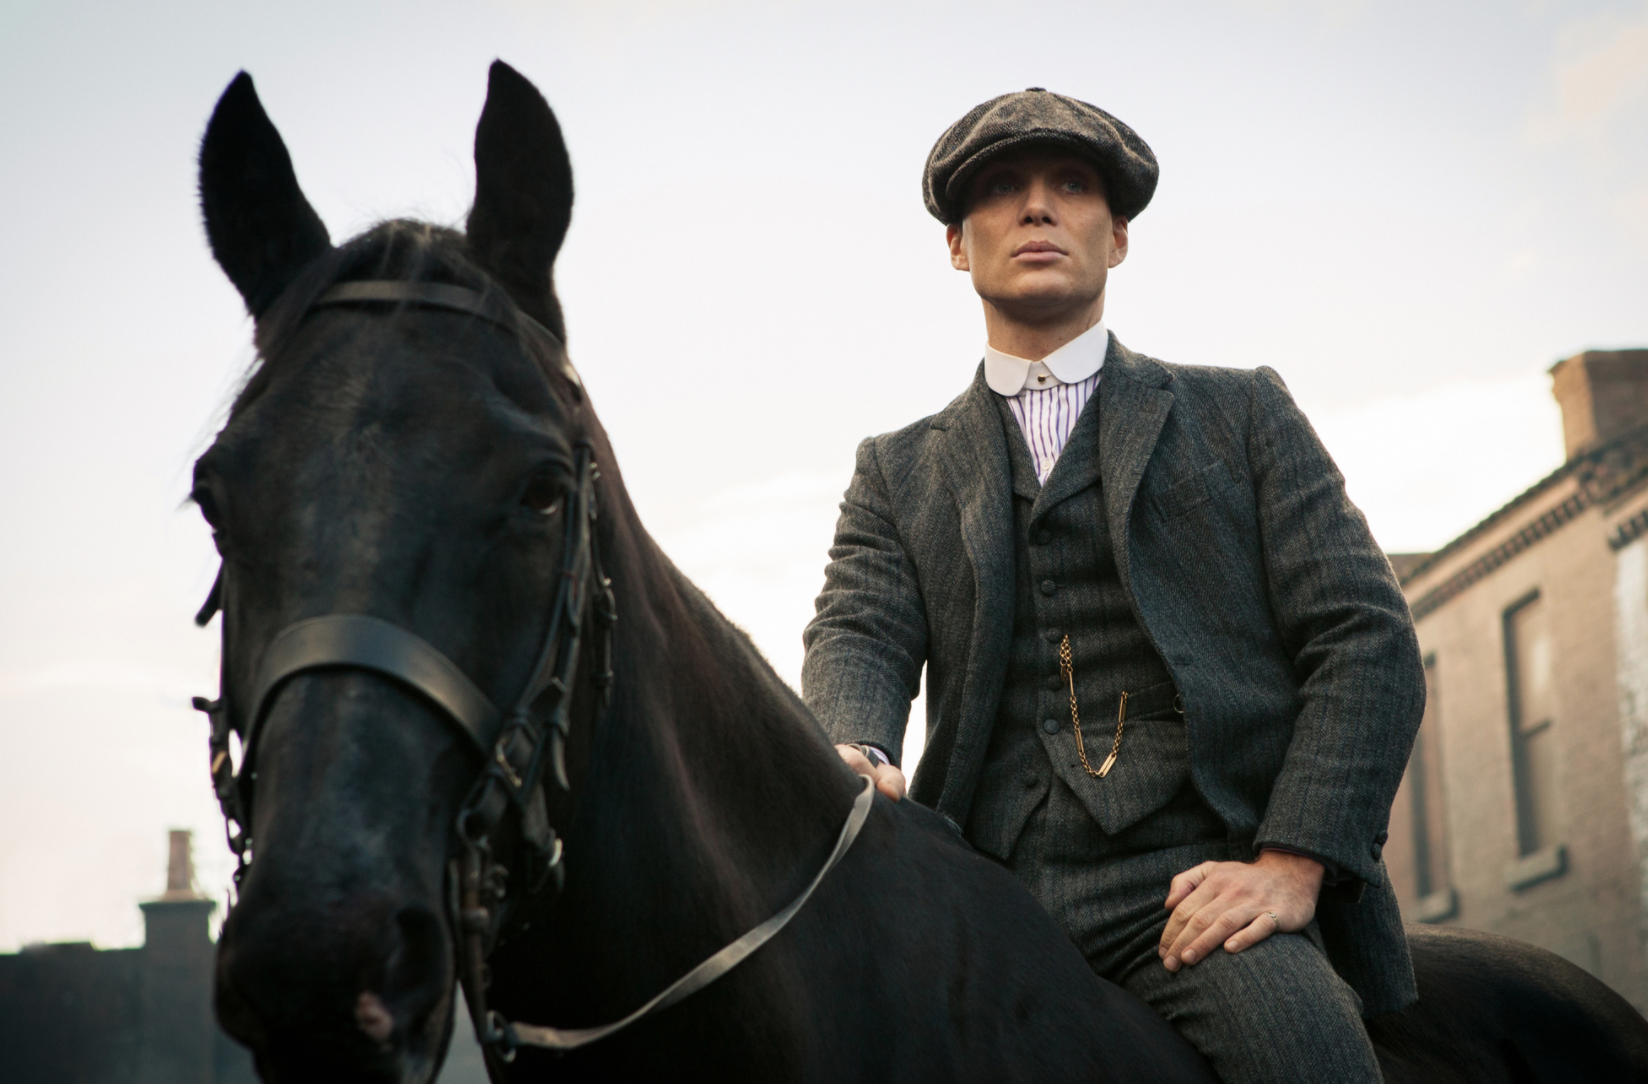 Peaky Blinders Is Back - Series 4, Episode 1 Review - The Game of